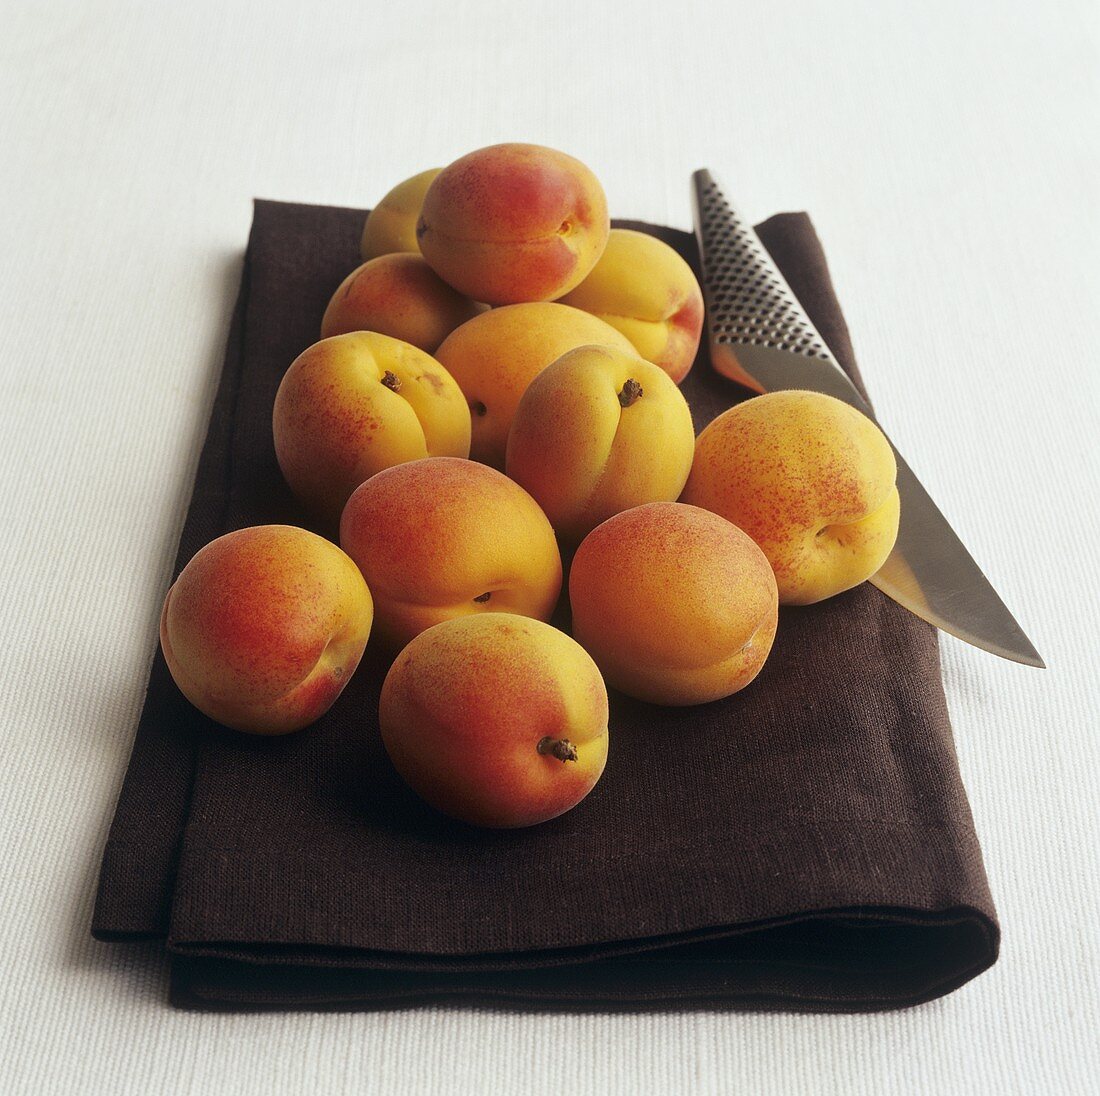 Apricots with knife on brown cloth